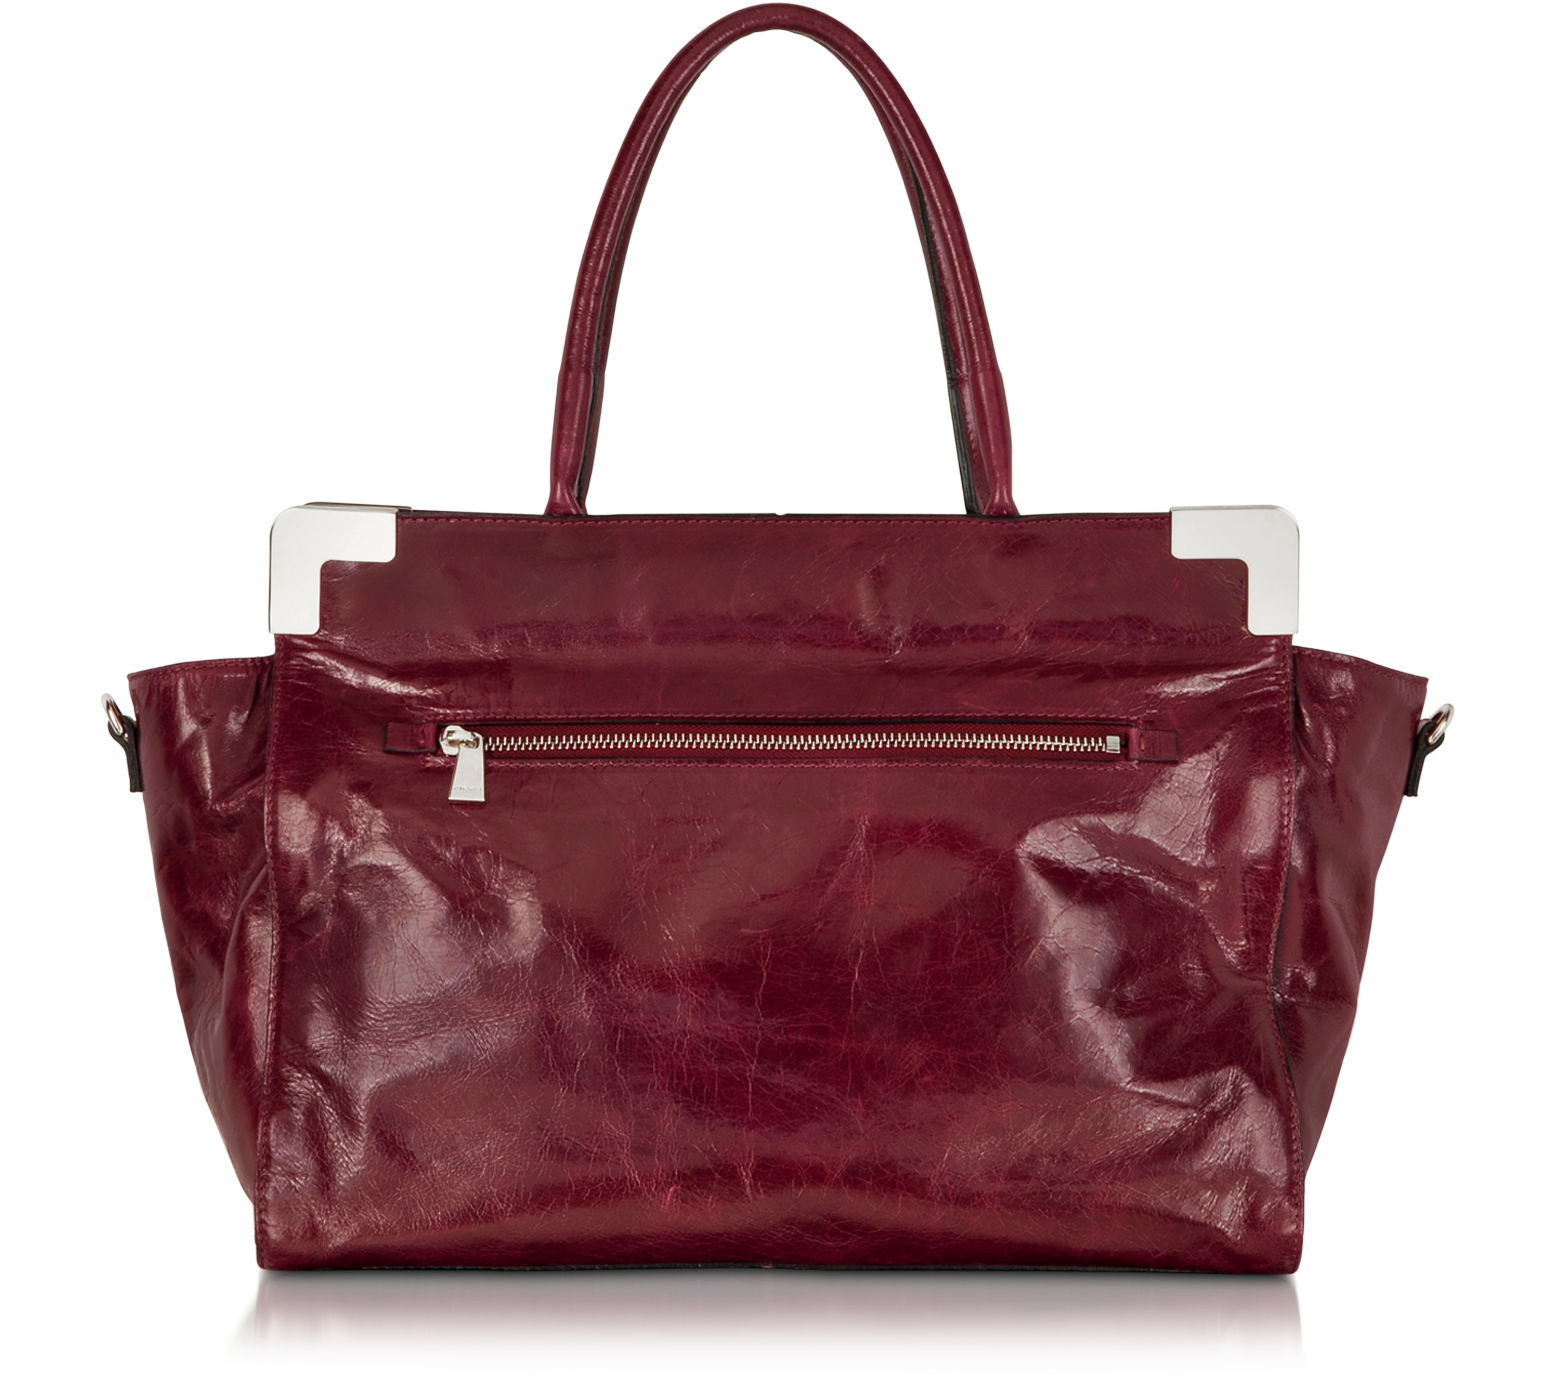 Pinko Burgundy Conversione Leather Tote at FORZIERI